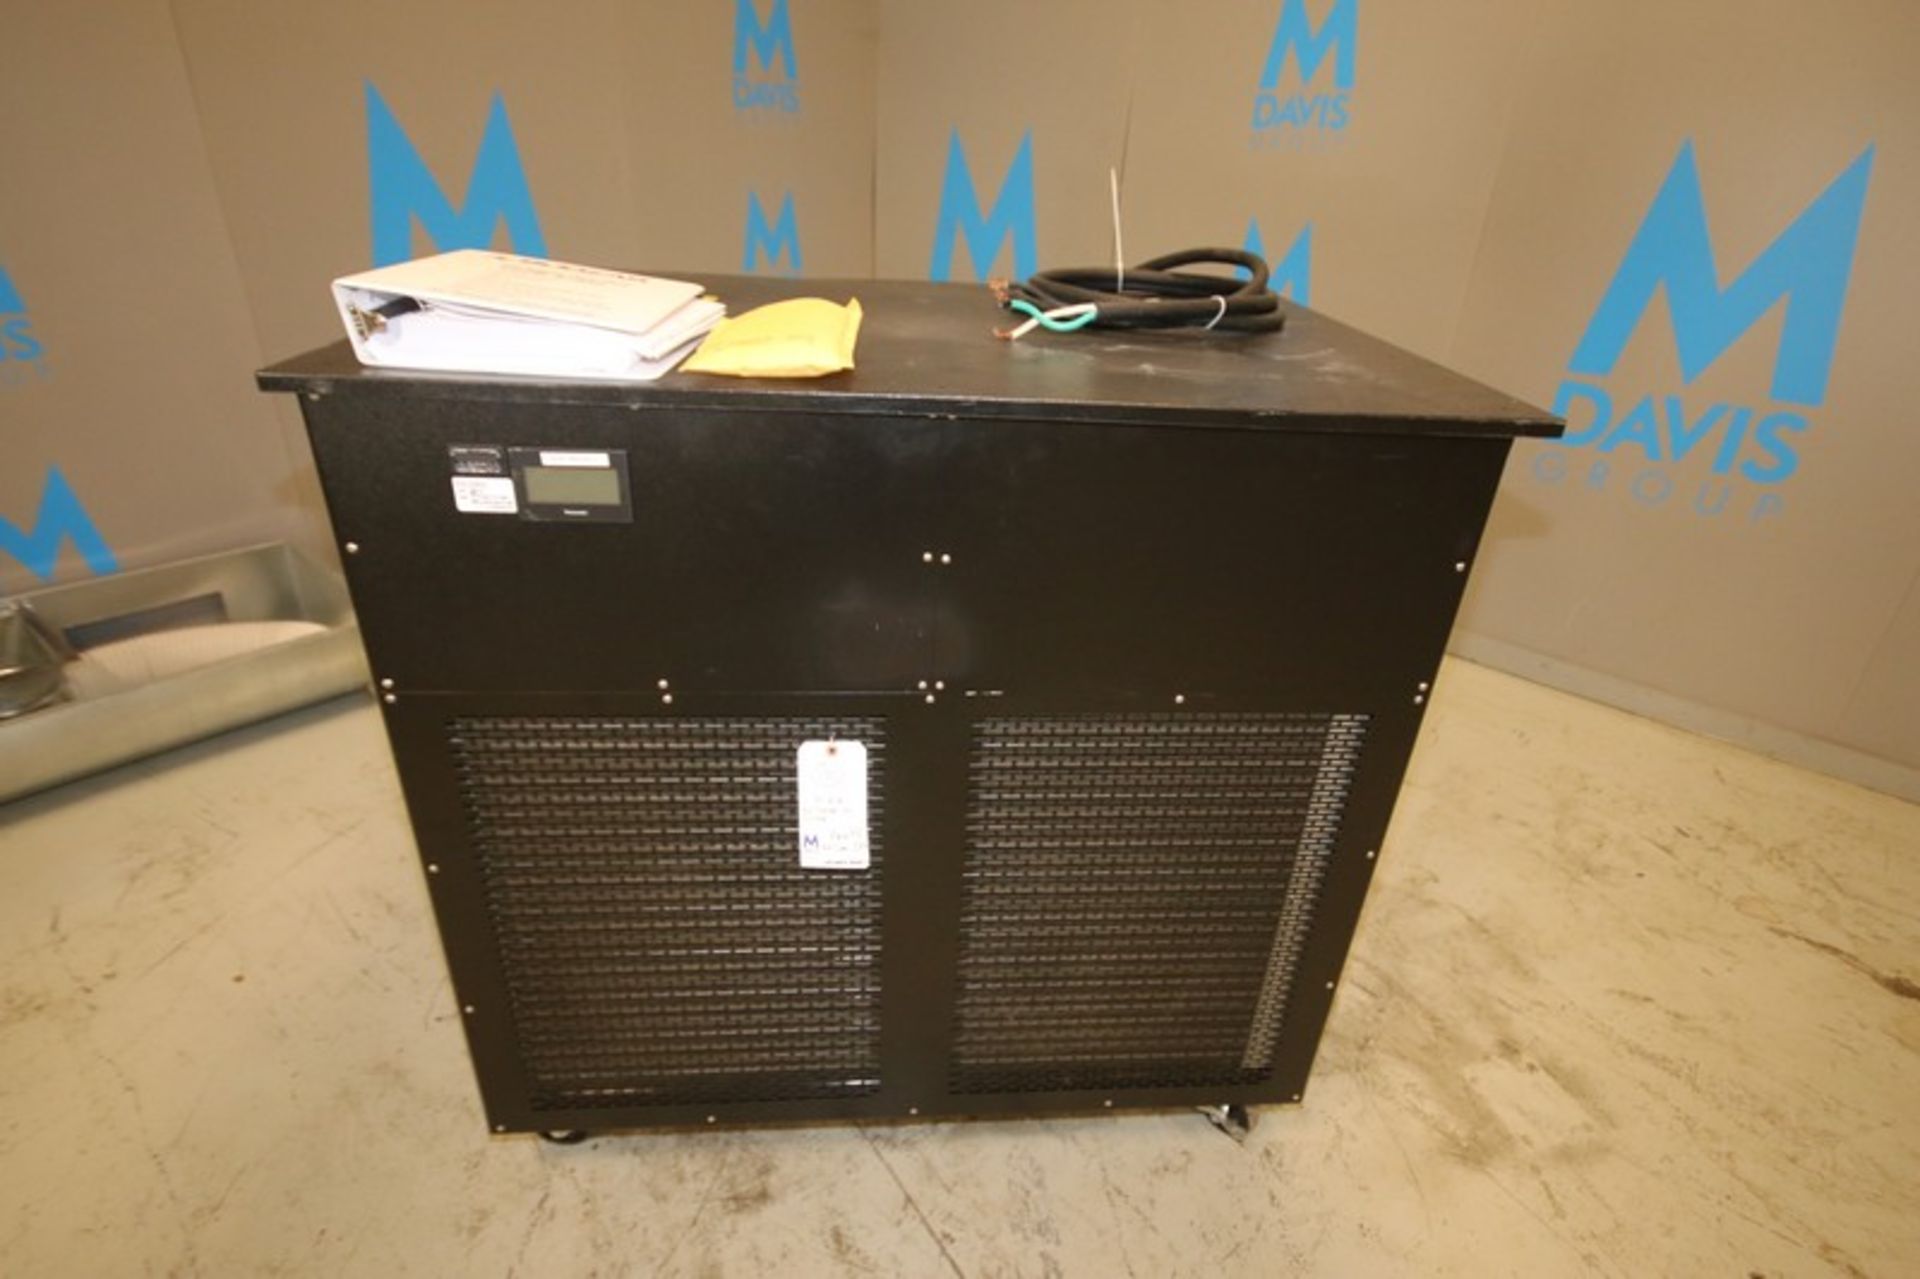 2018 BV Thermal Systems Re Circulating Chiller,Model #MC-400-C2-E1, SN 2018404-33537, 208-230V, 1 - Image 2 of 8